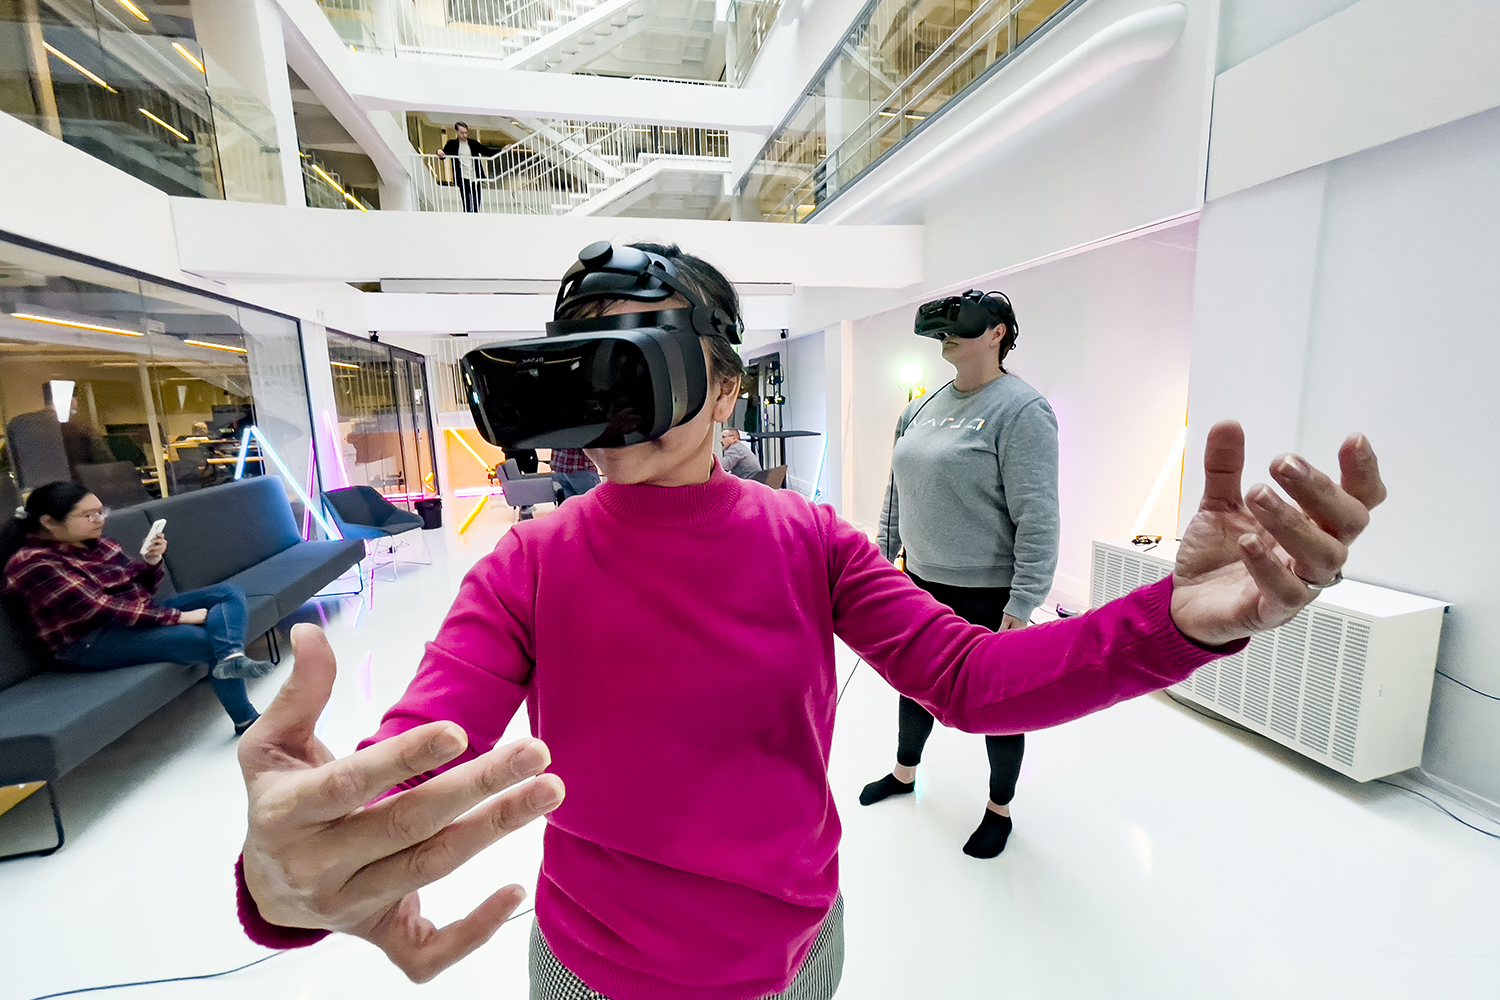 Woman wearing a pink shirt is testing a VR headset.